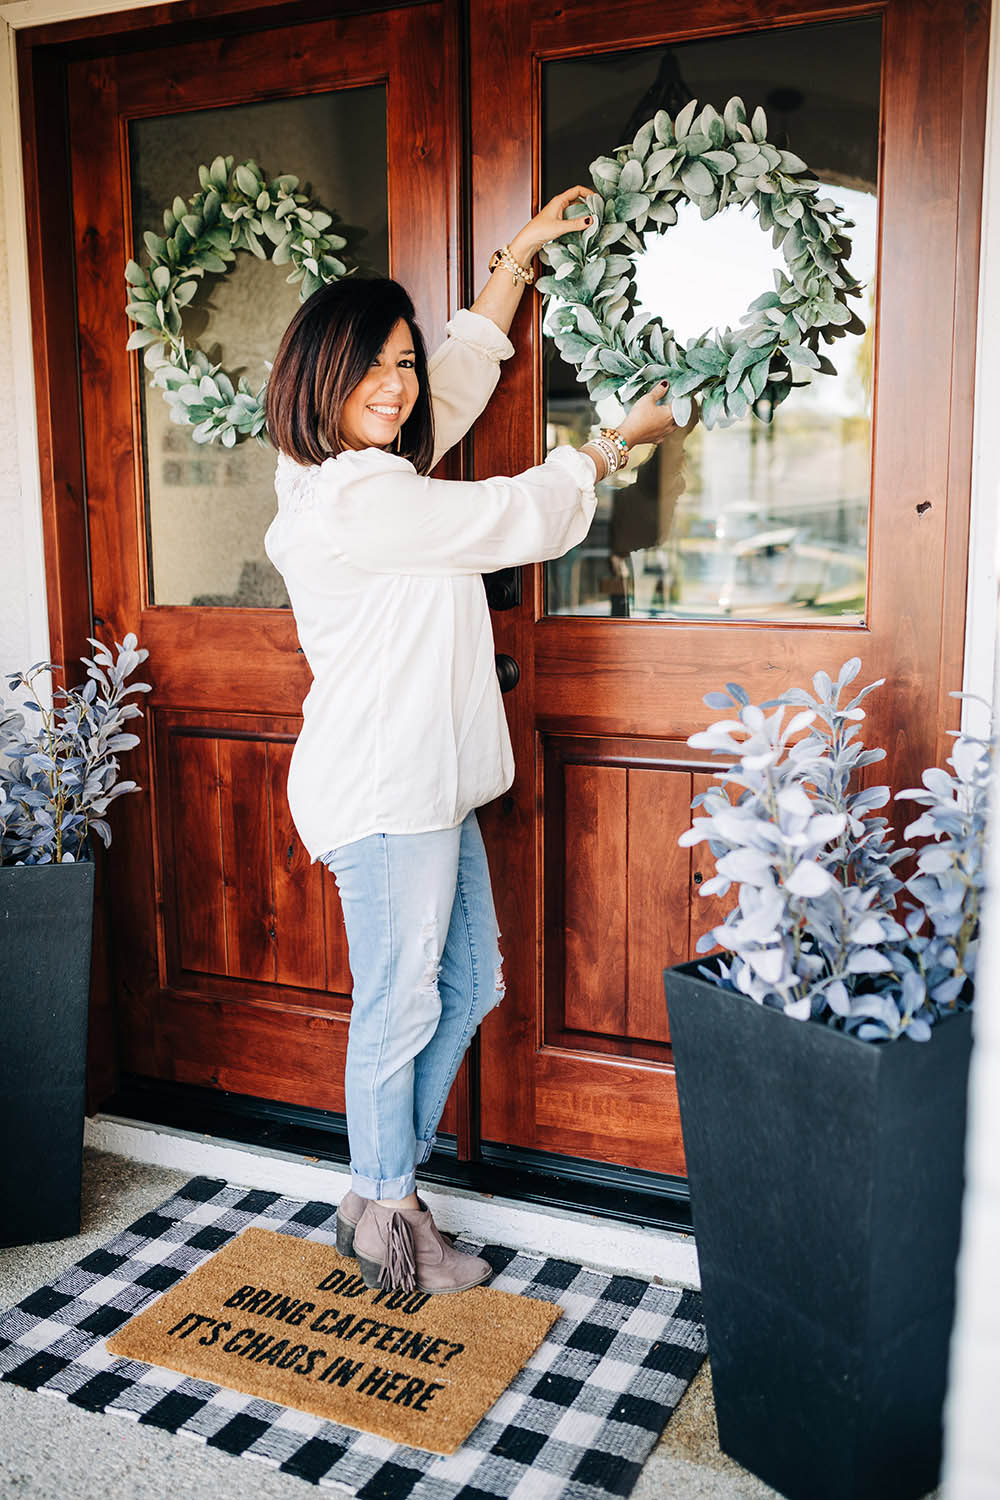 A woman adjusting a faux green wreath on a front door.